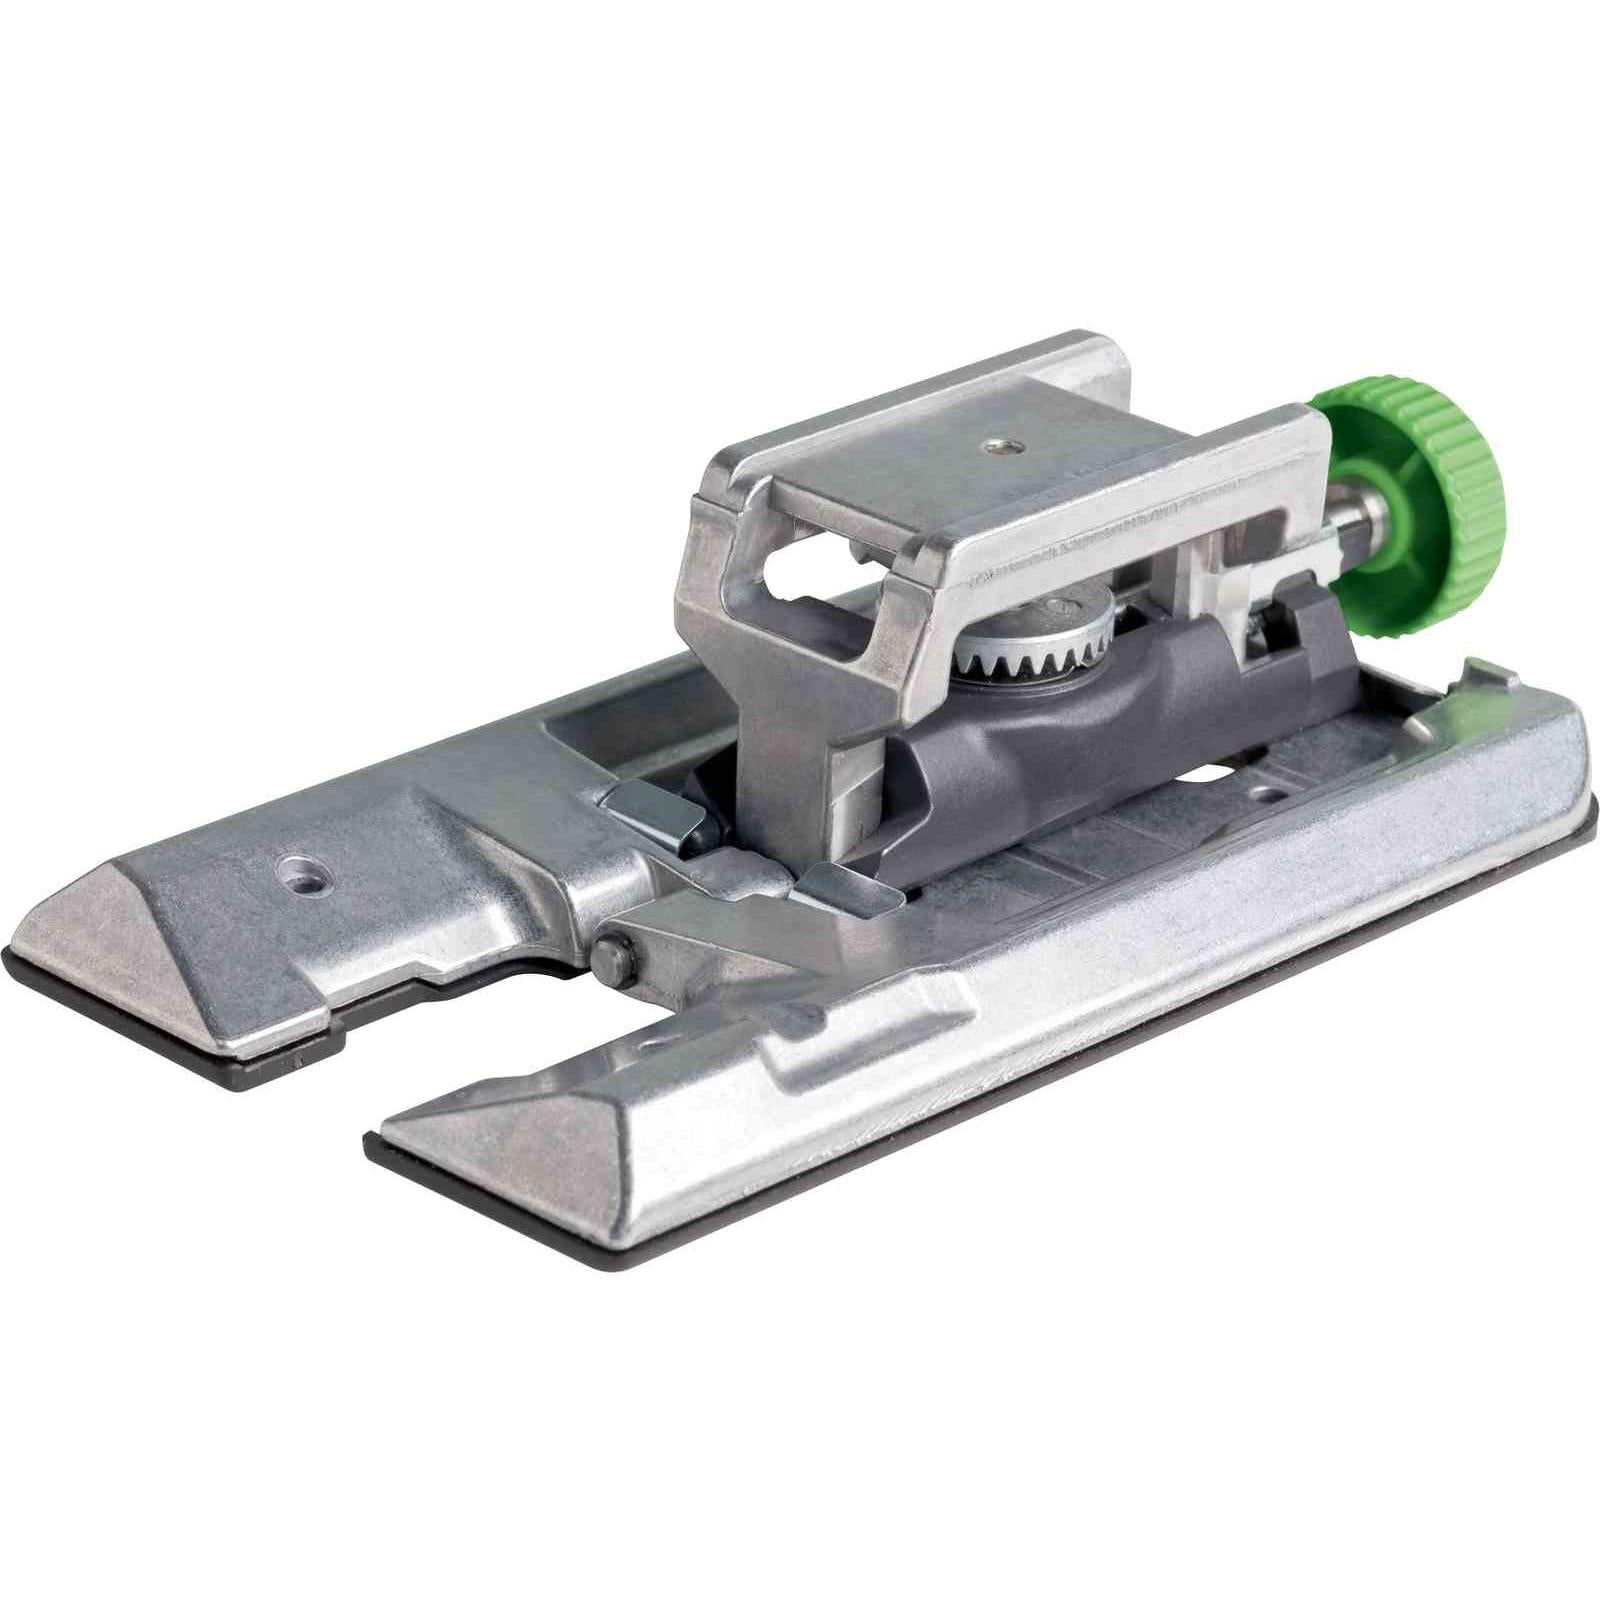 Festool Angle table WT-PS 420 496134 Power Tool Services